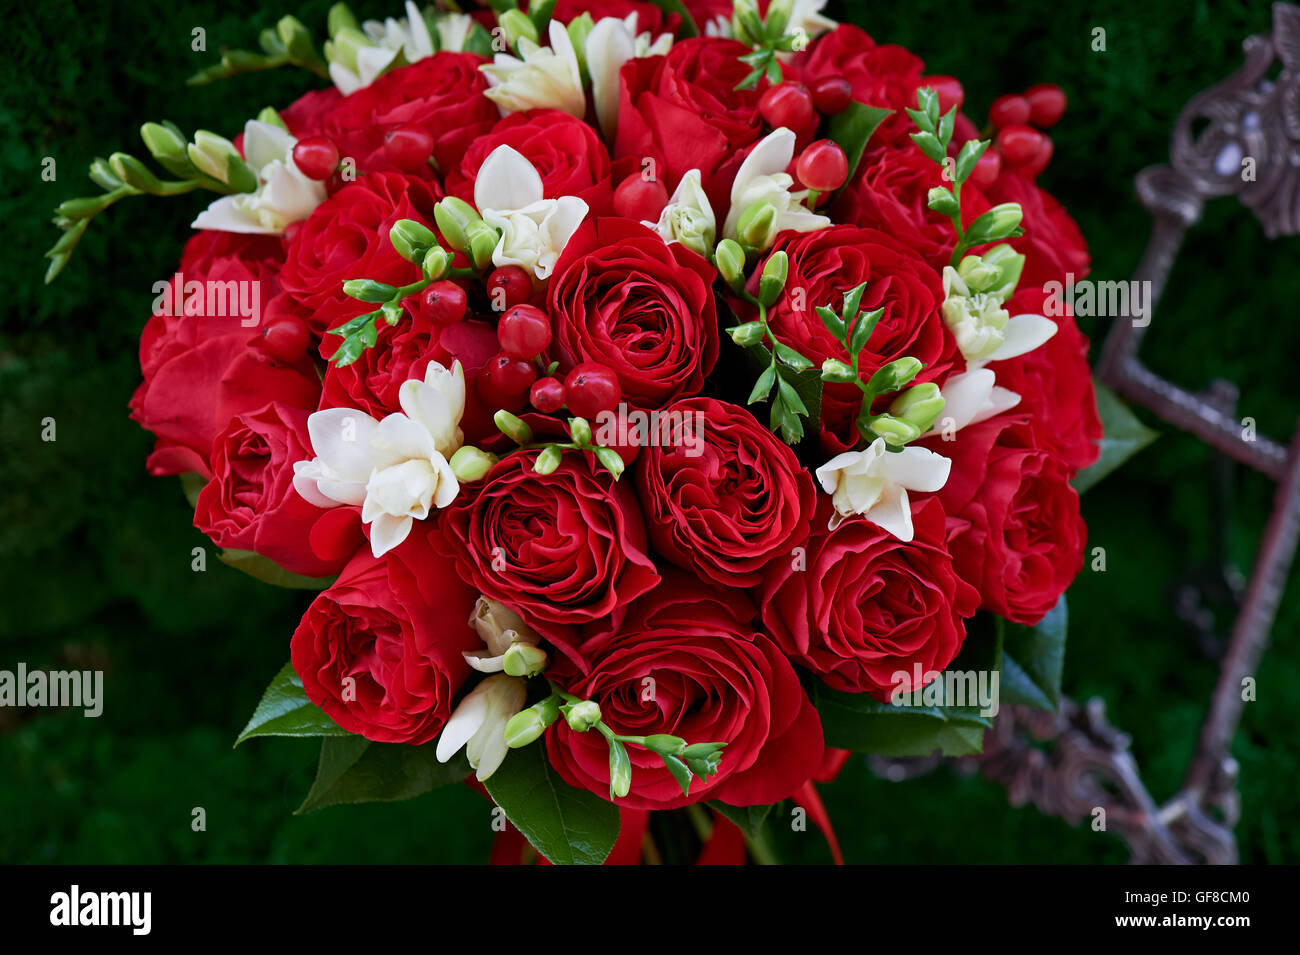 dense red bouquet of roses, with red berries and decor. Close Stock Photo